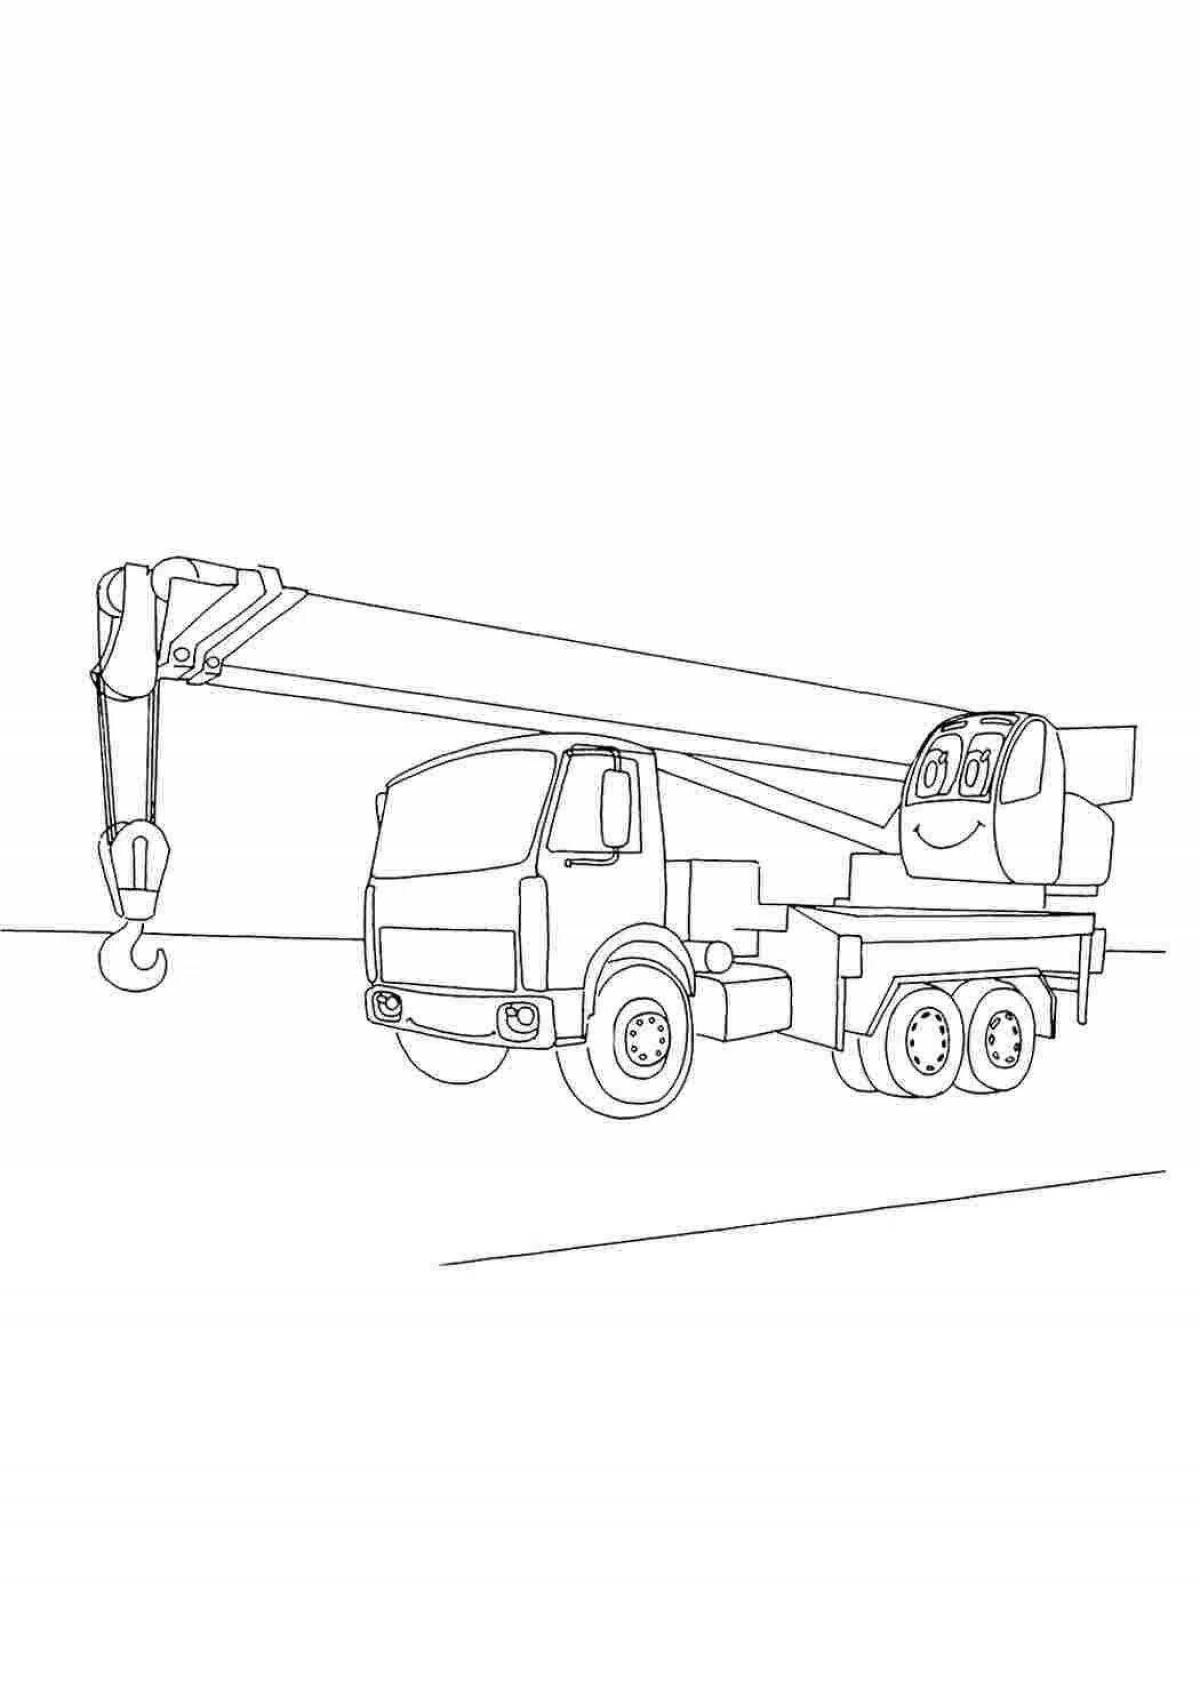 Playful crane coloring page for 3-4 year olds